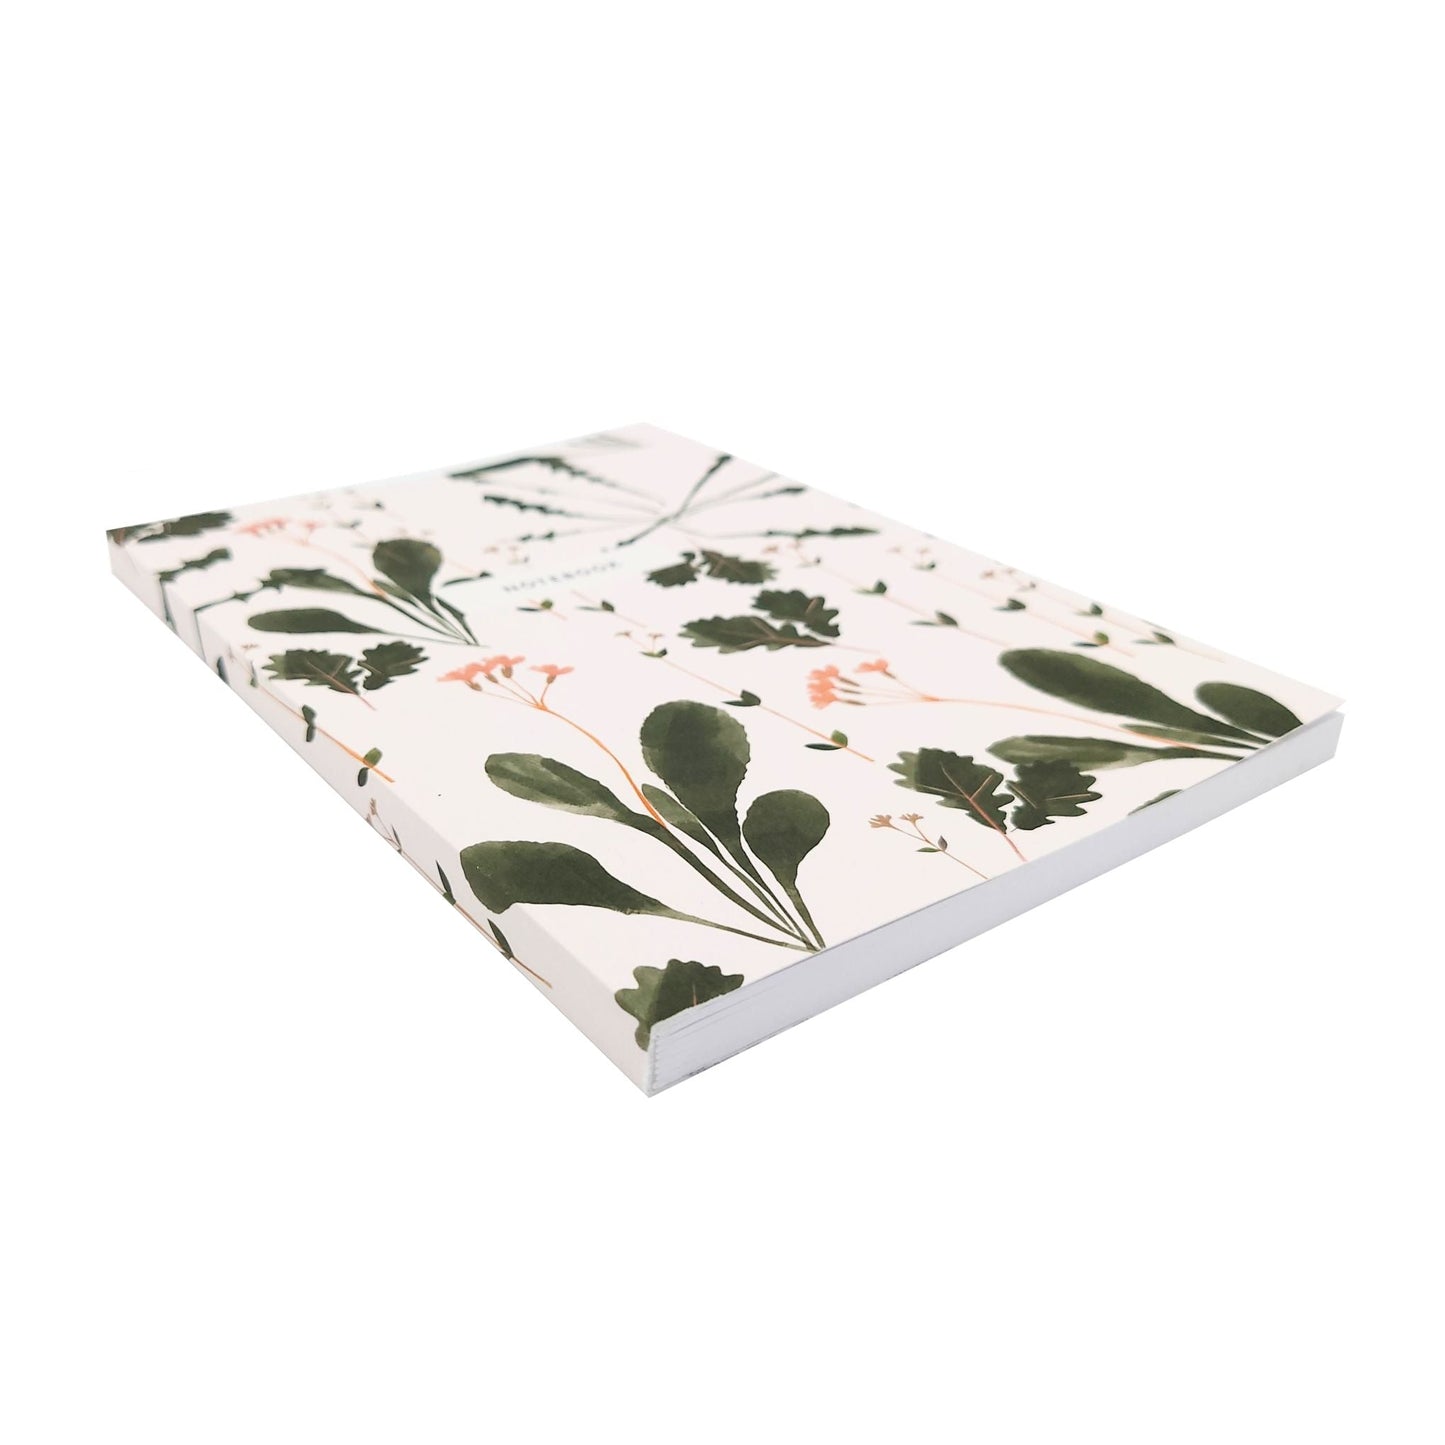 Load image into Gallery viewer, Wildflower print notebook seen at an angle.
